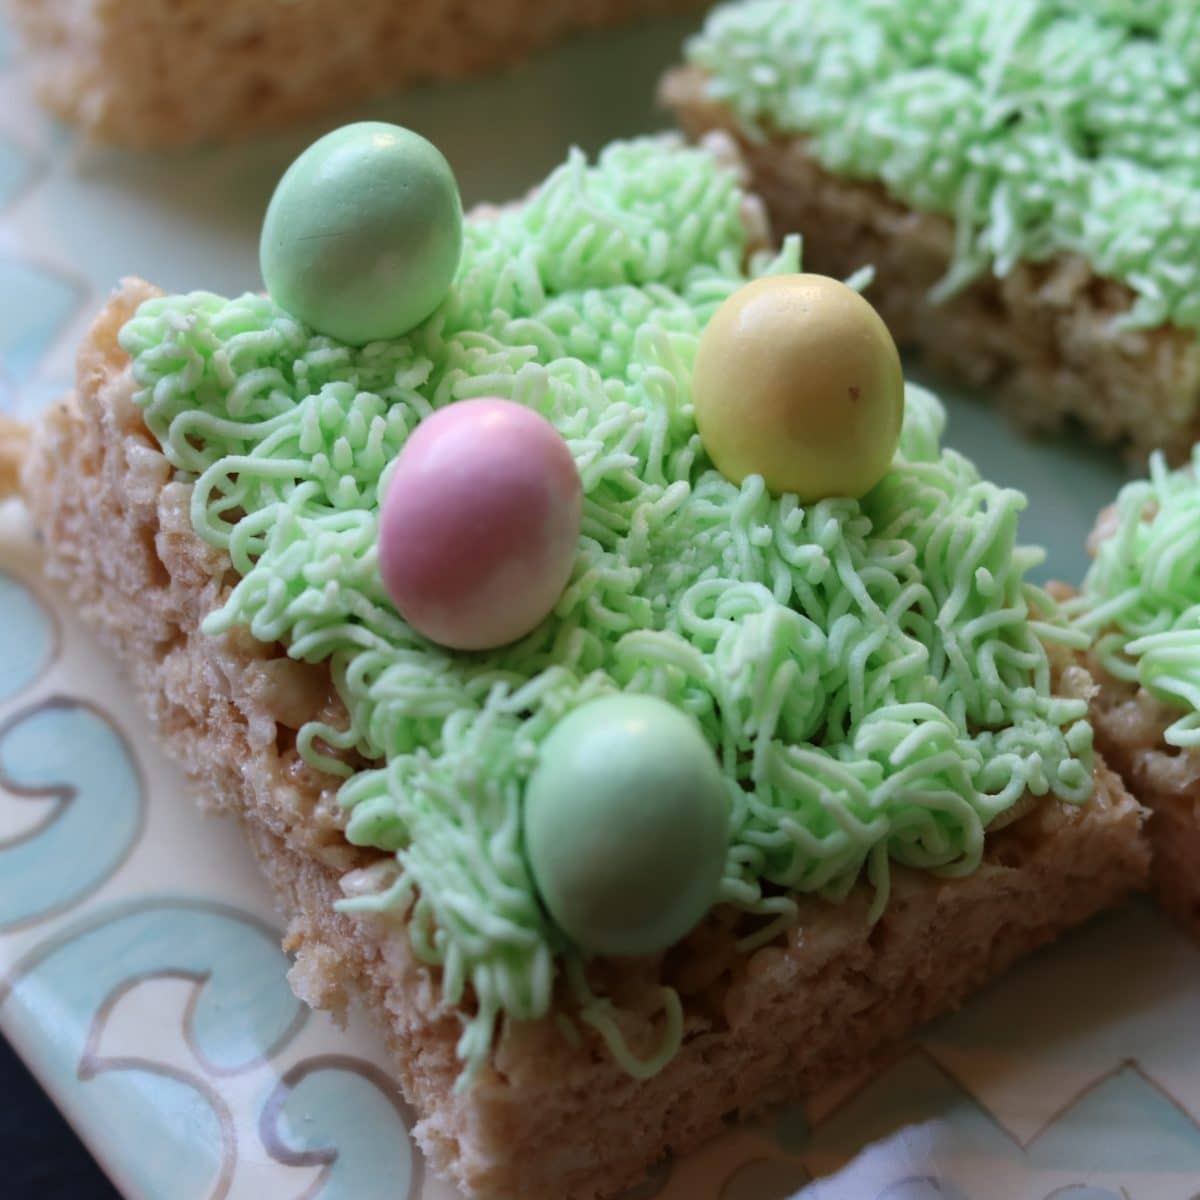 Easter Rice Krispy Treats With Chocolate Eggs || Erin Brighton | Easter treats | easy recipes | kid parties | gluten free desserts | Wilton decorating